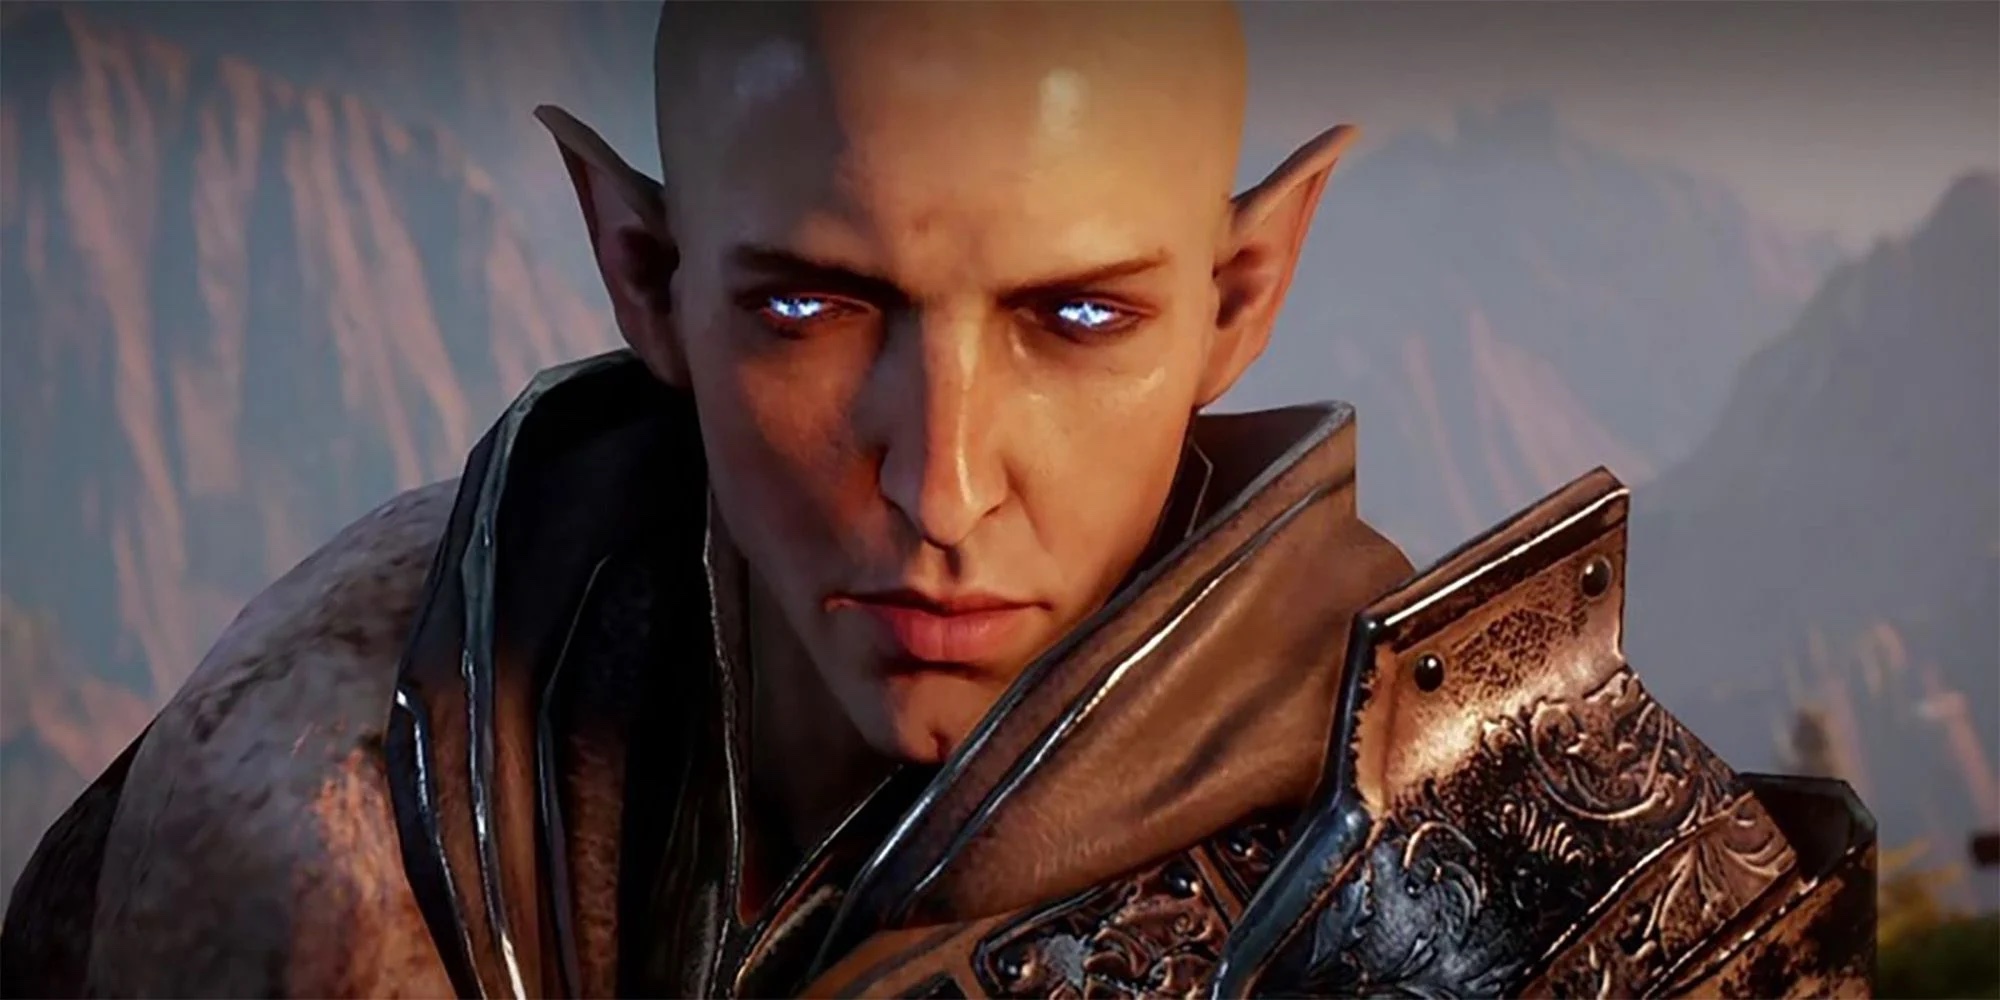 Buy Dragon Age Inquisition PC Game